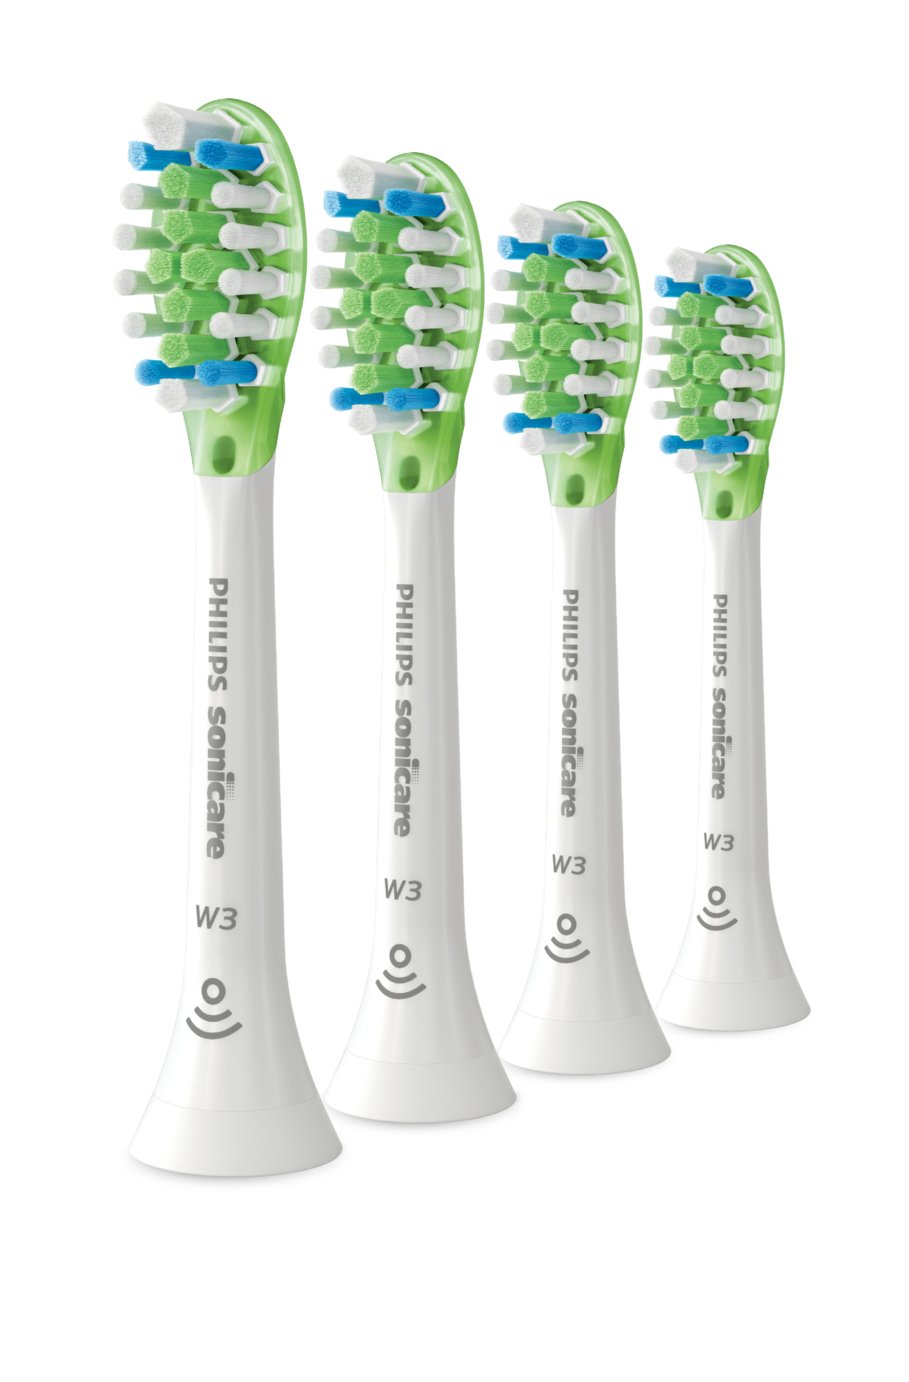 Philips Sonicare Premium White Electric Toothbrush Heads - 4